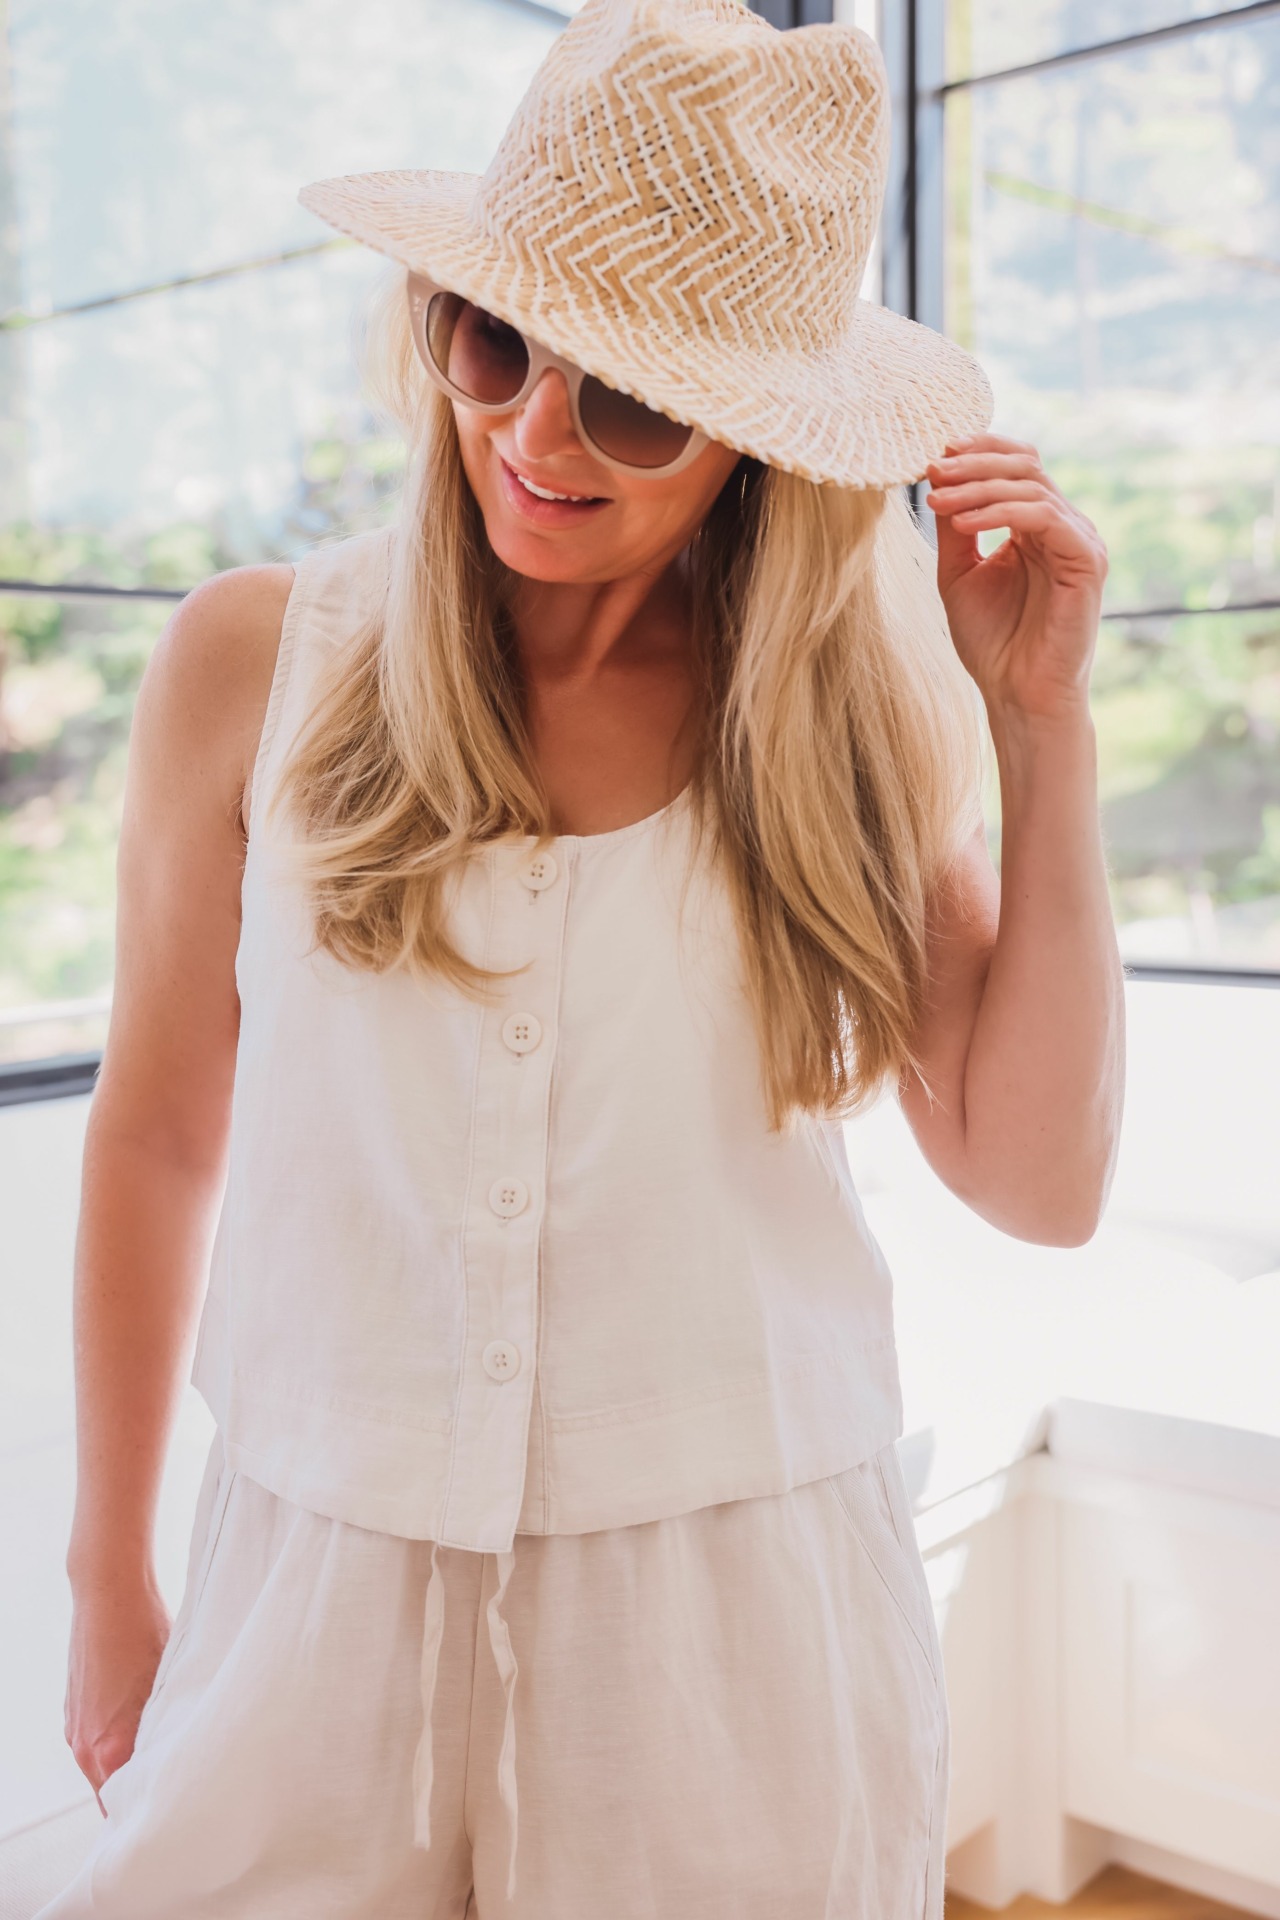 Labor Day outfits, Labor Day Outfit Ideas, comfortable summer outfits, neutral summer outfits, travel-friendly outfits, what to wear in the heat, stylish end of summer looks, Erin Busbee, Busbee Style, Fashion Over 40, spledid linen Billie tank, Splendid Billie linen pants